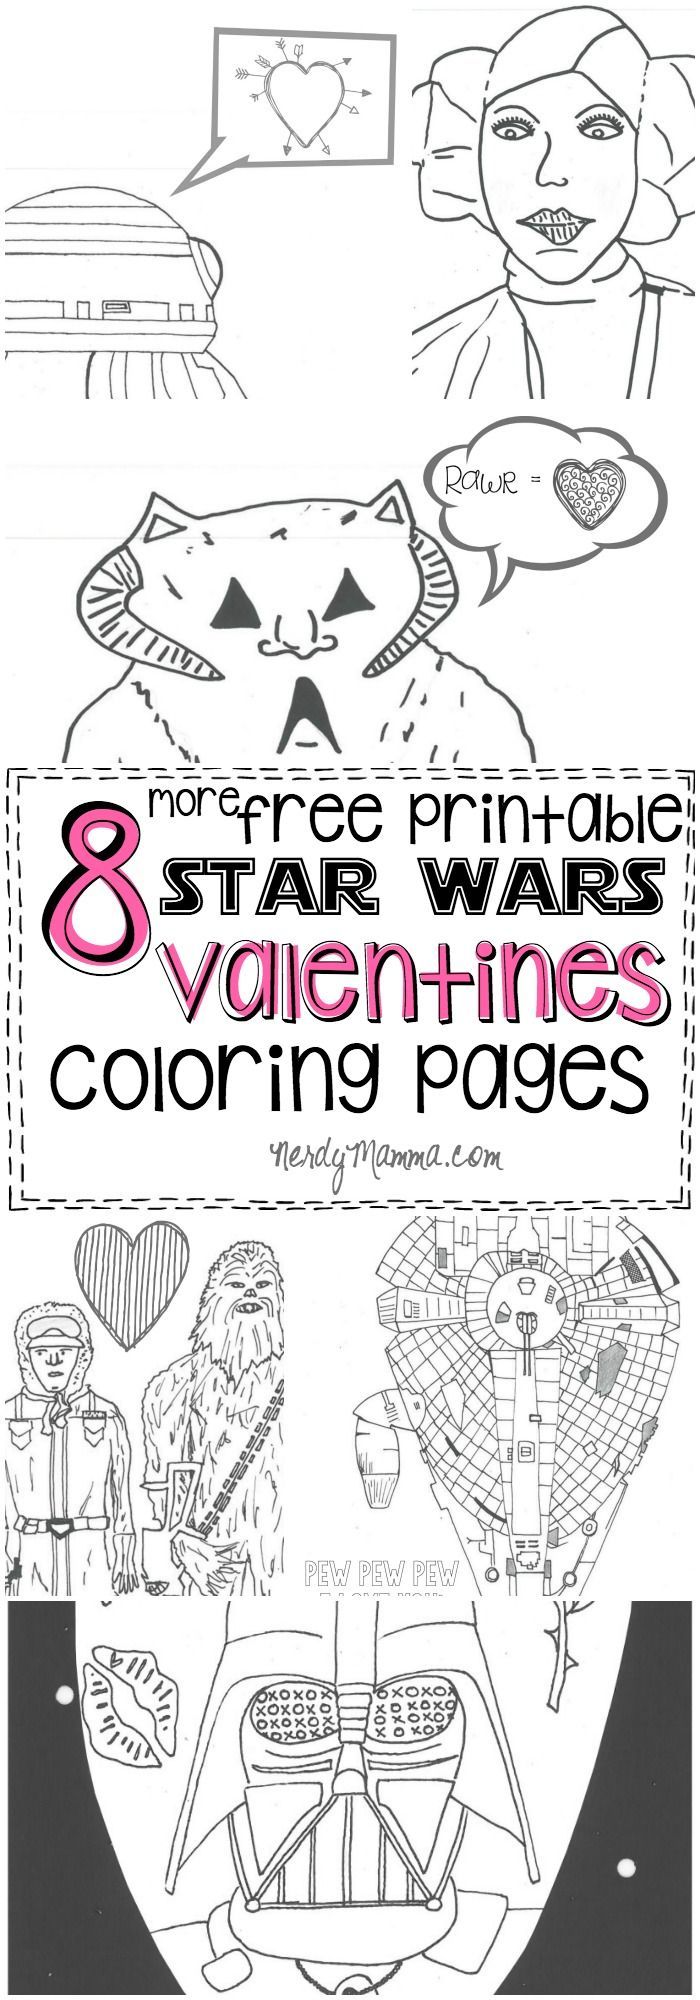 More star wars inspired valentines coloring pages star wars valentines valentine coloring pages valentine coloring